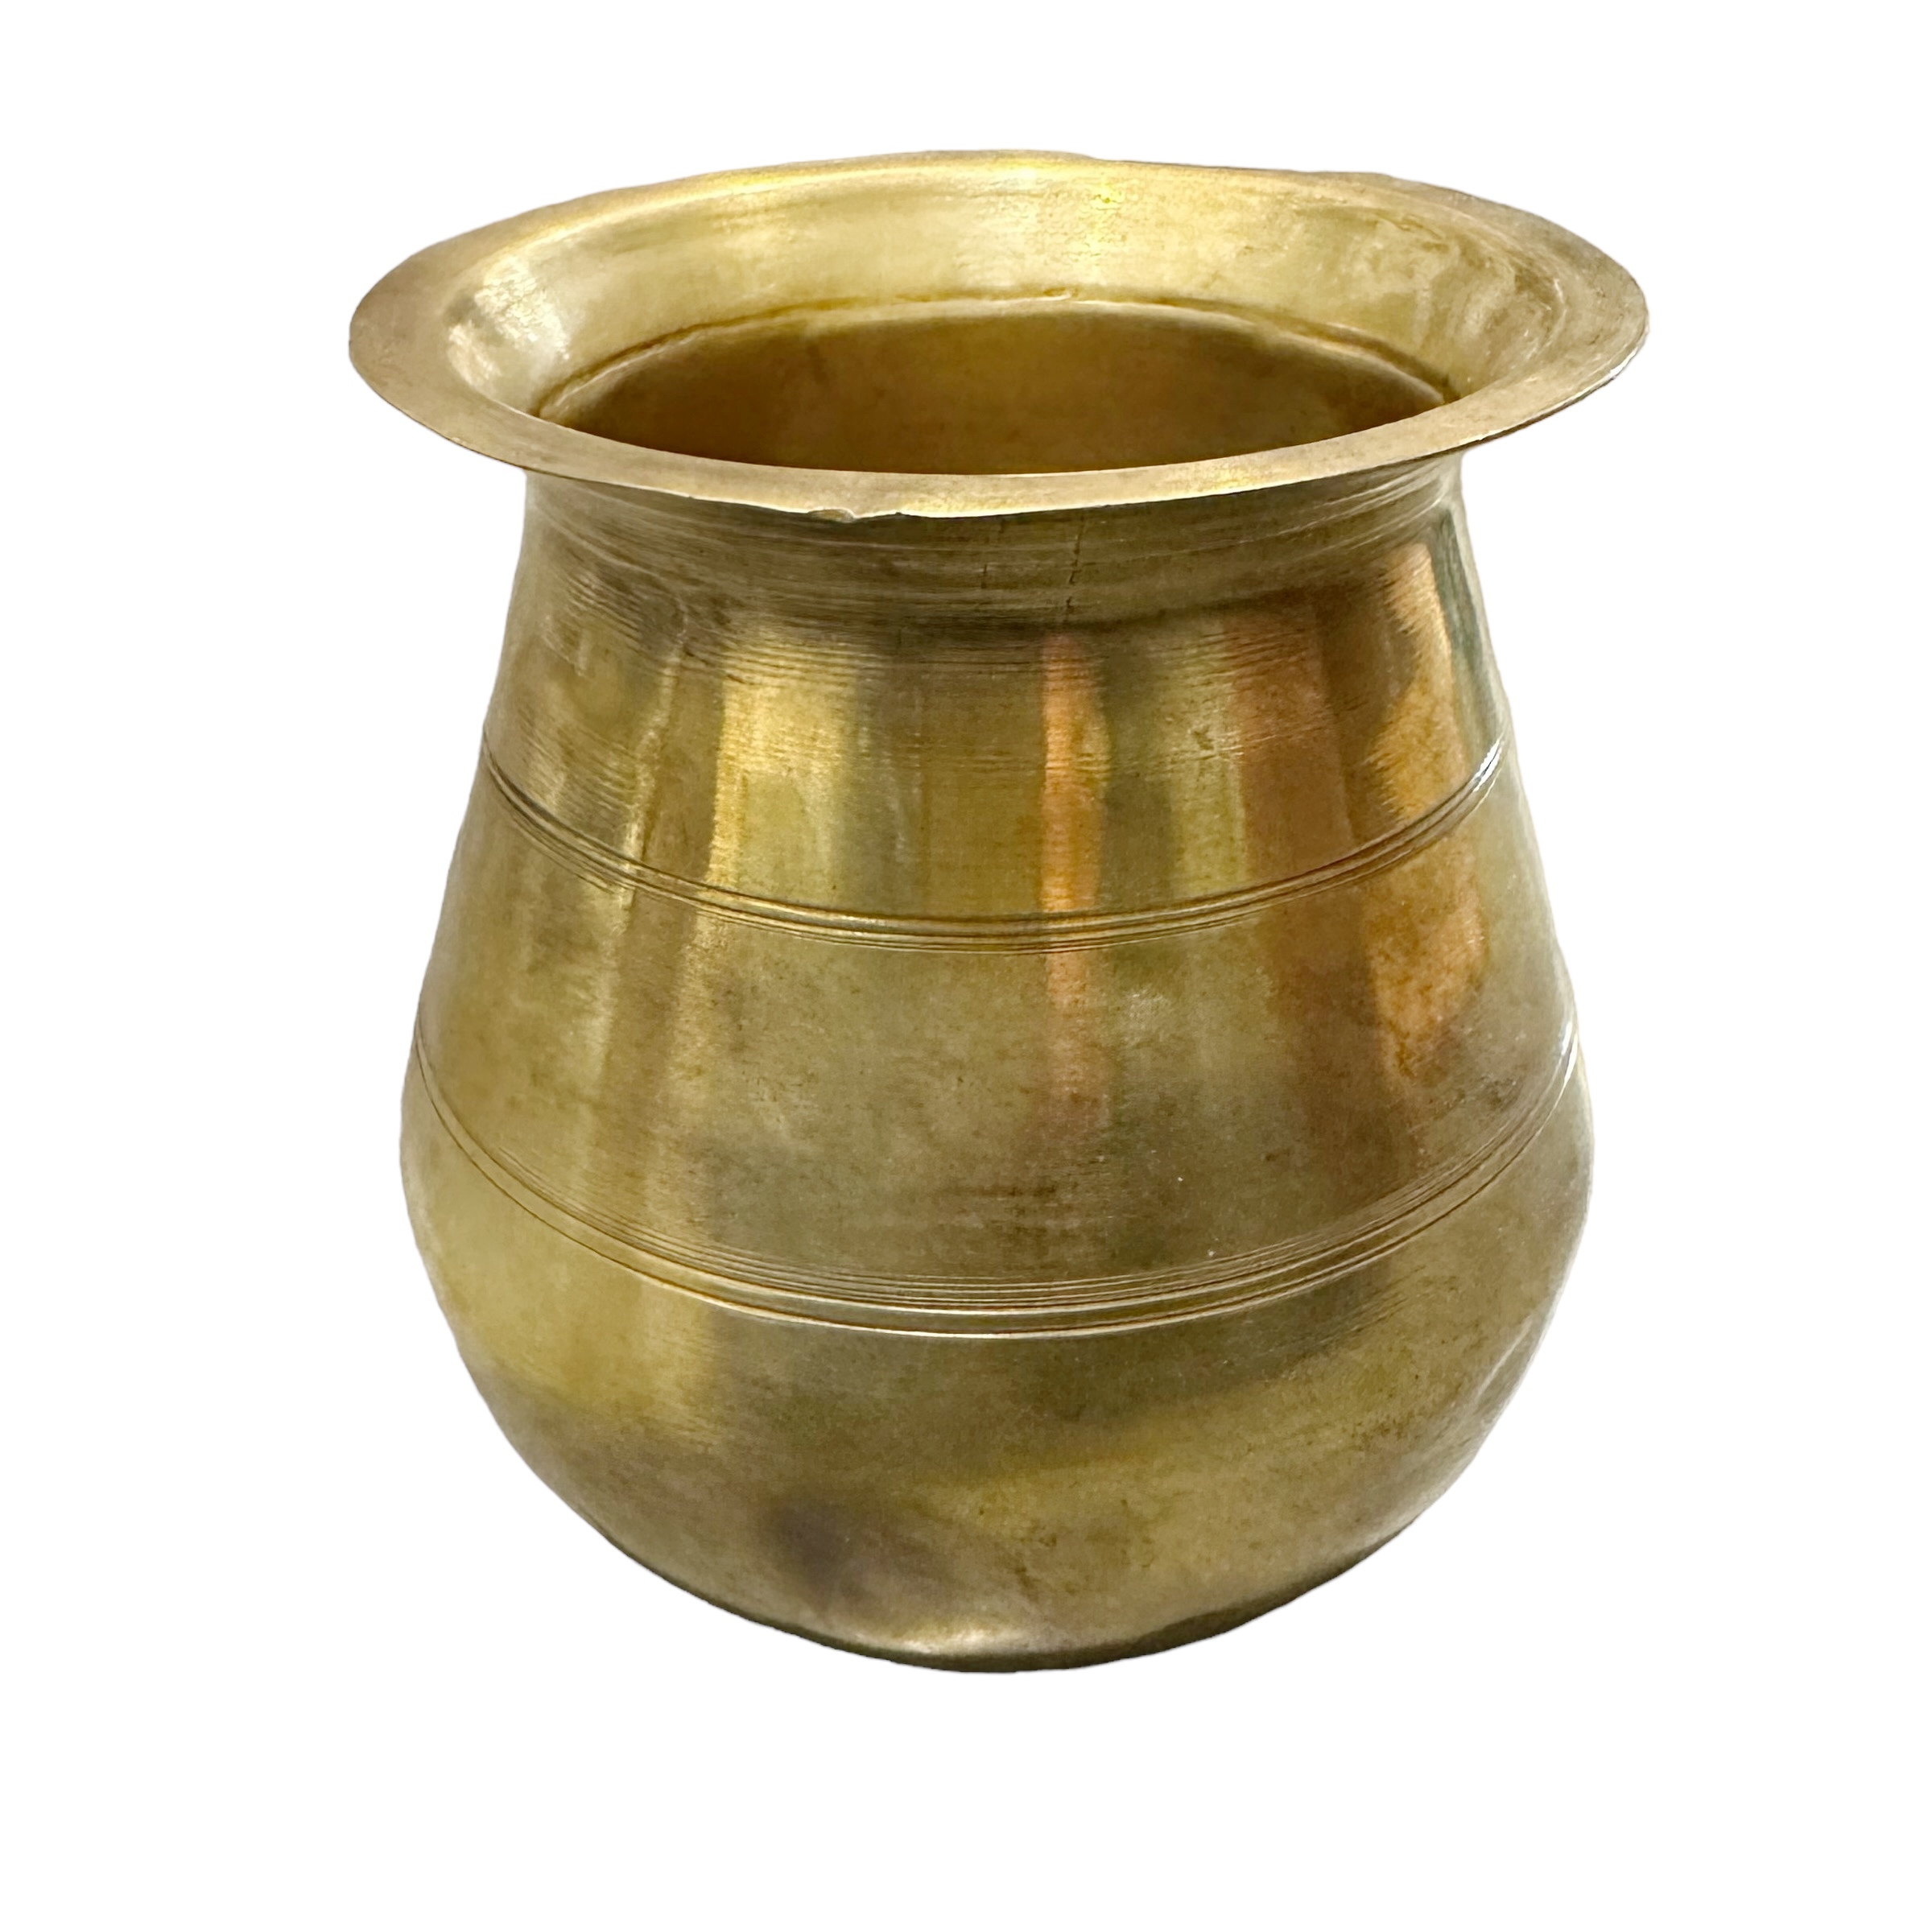 What is the color of Indian Brass?